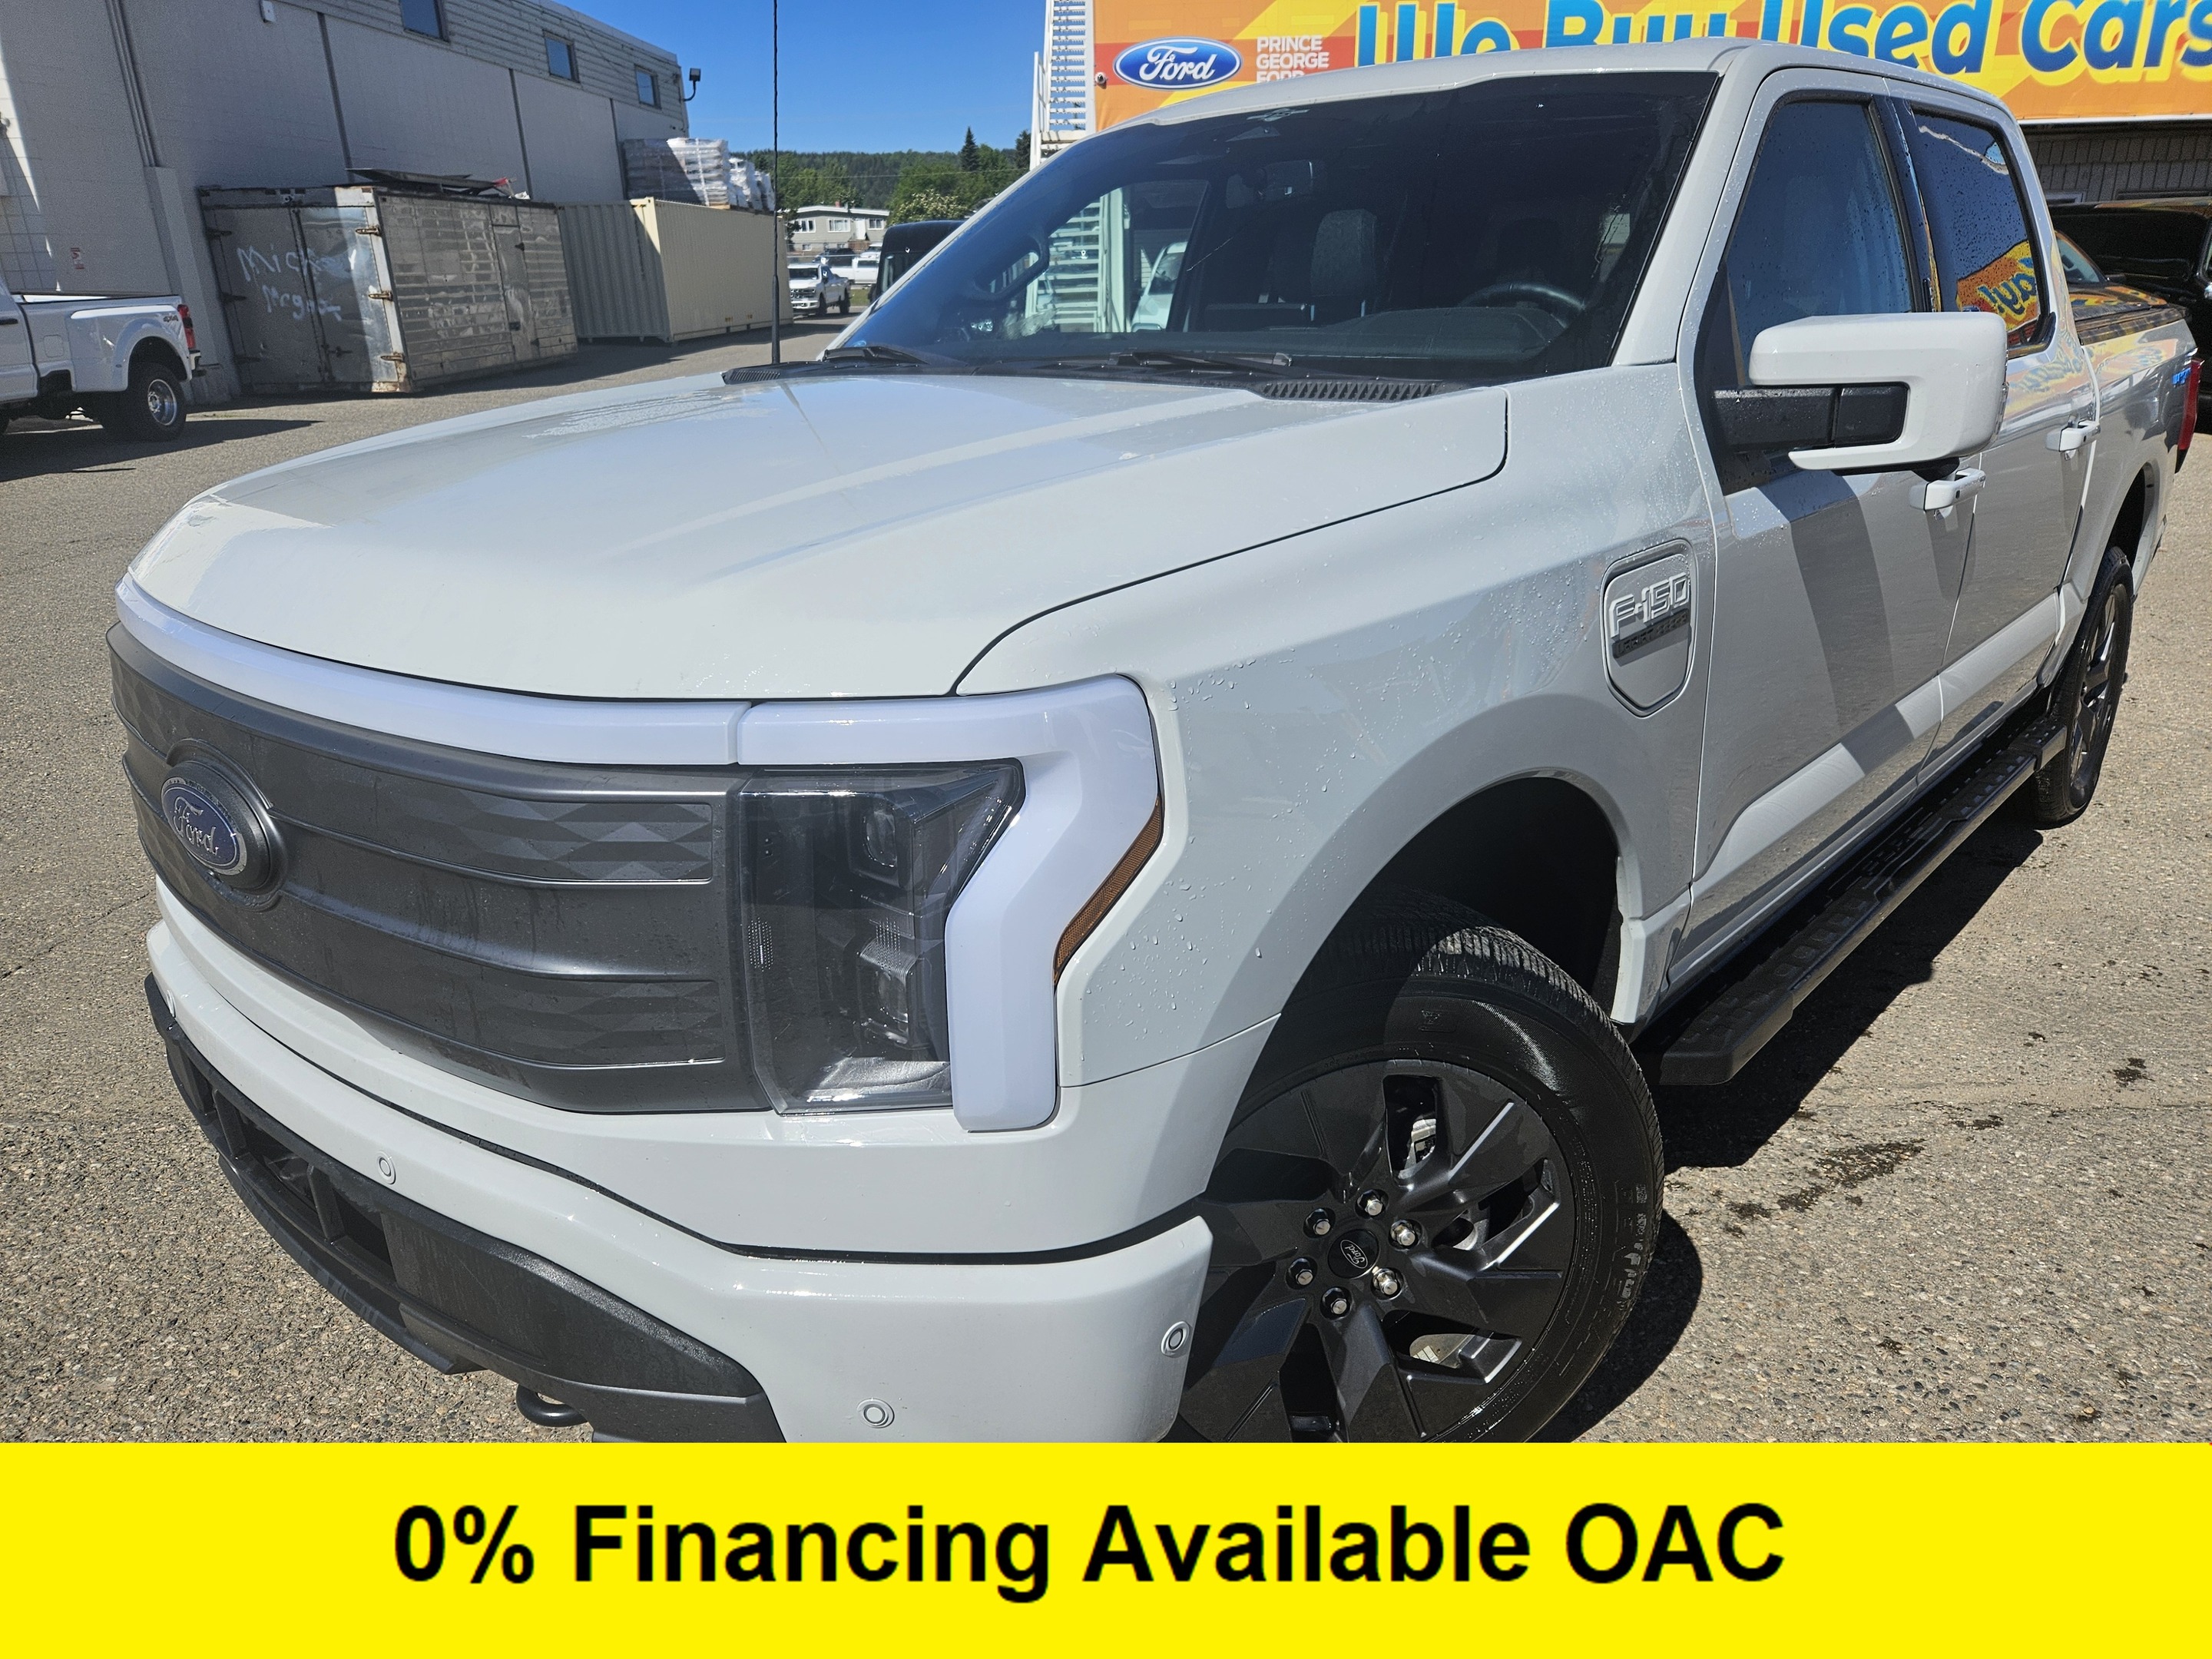 2023 Ford F-150 Lightning Lariat | 511A | 145 | Max Tow PKG | Fully-Electric